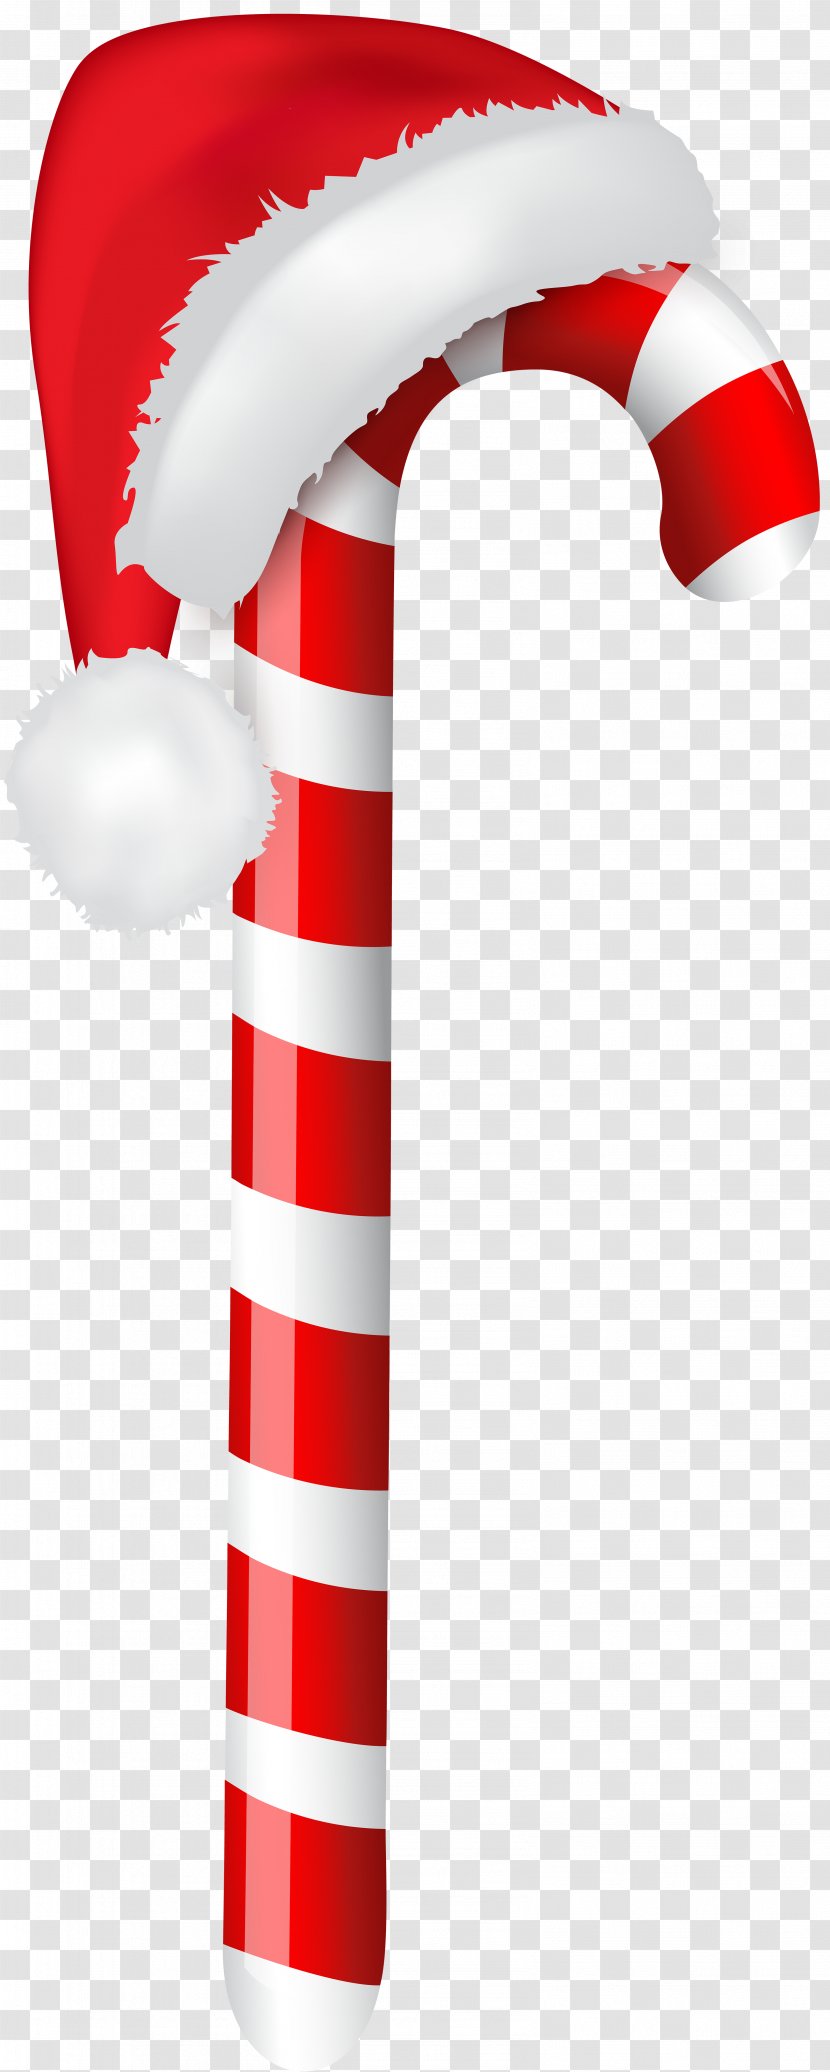 Candy Cane Santa Claus Christmas Clip Art - Product Design - With Hat Image Transparent PNG